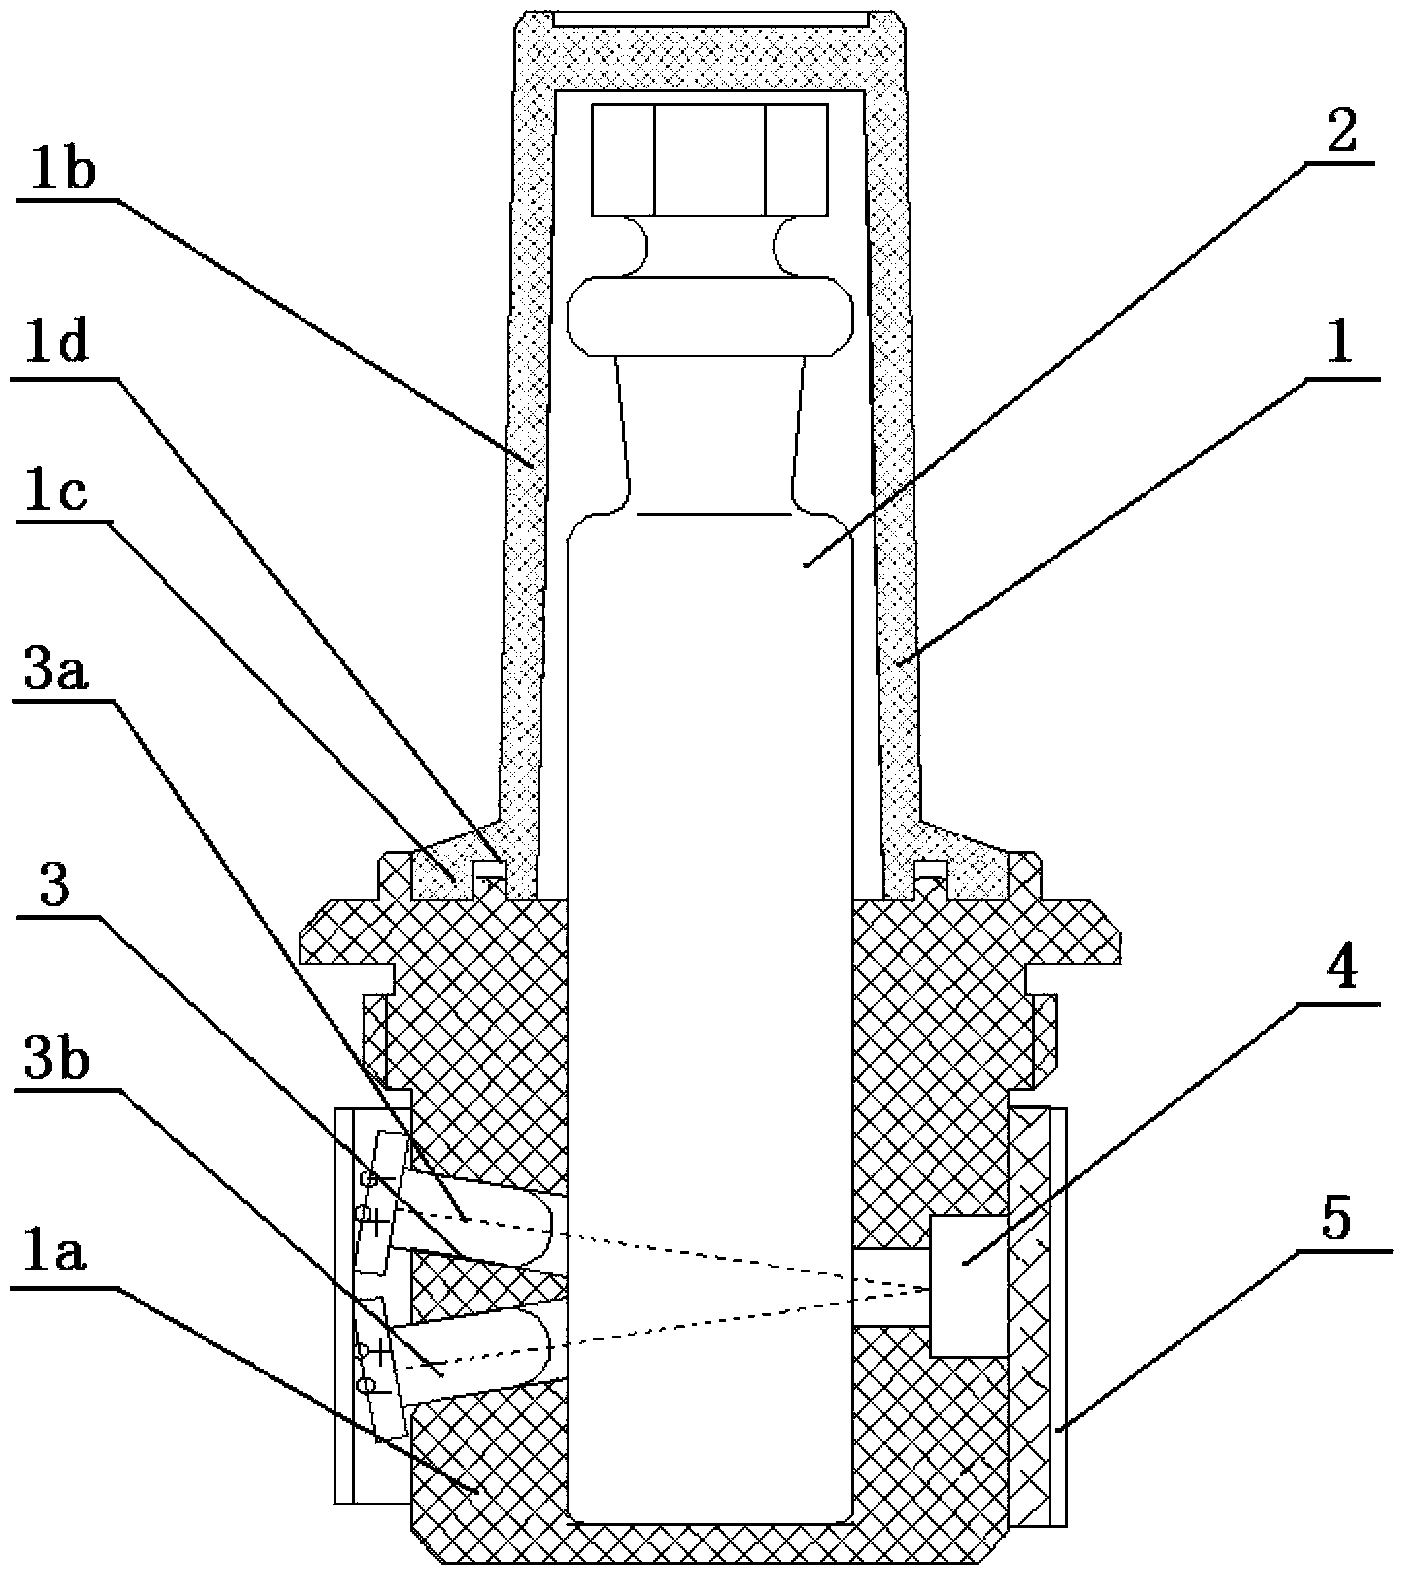 Spectrophotometric detector for detecting methanal and ammonia in air